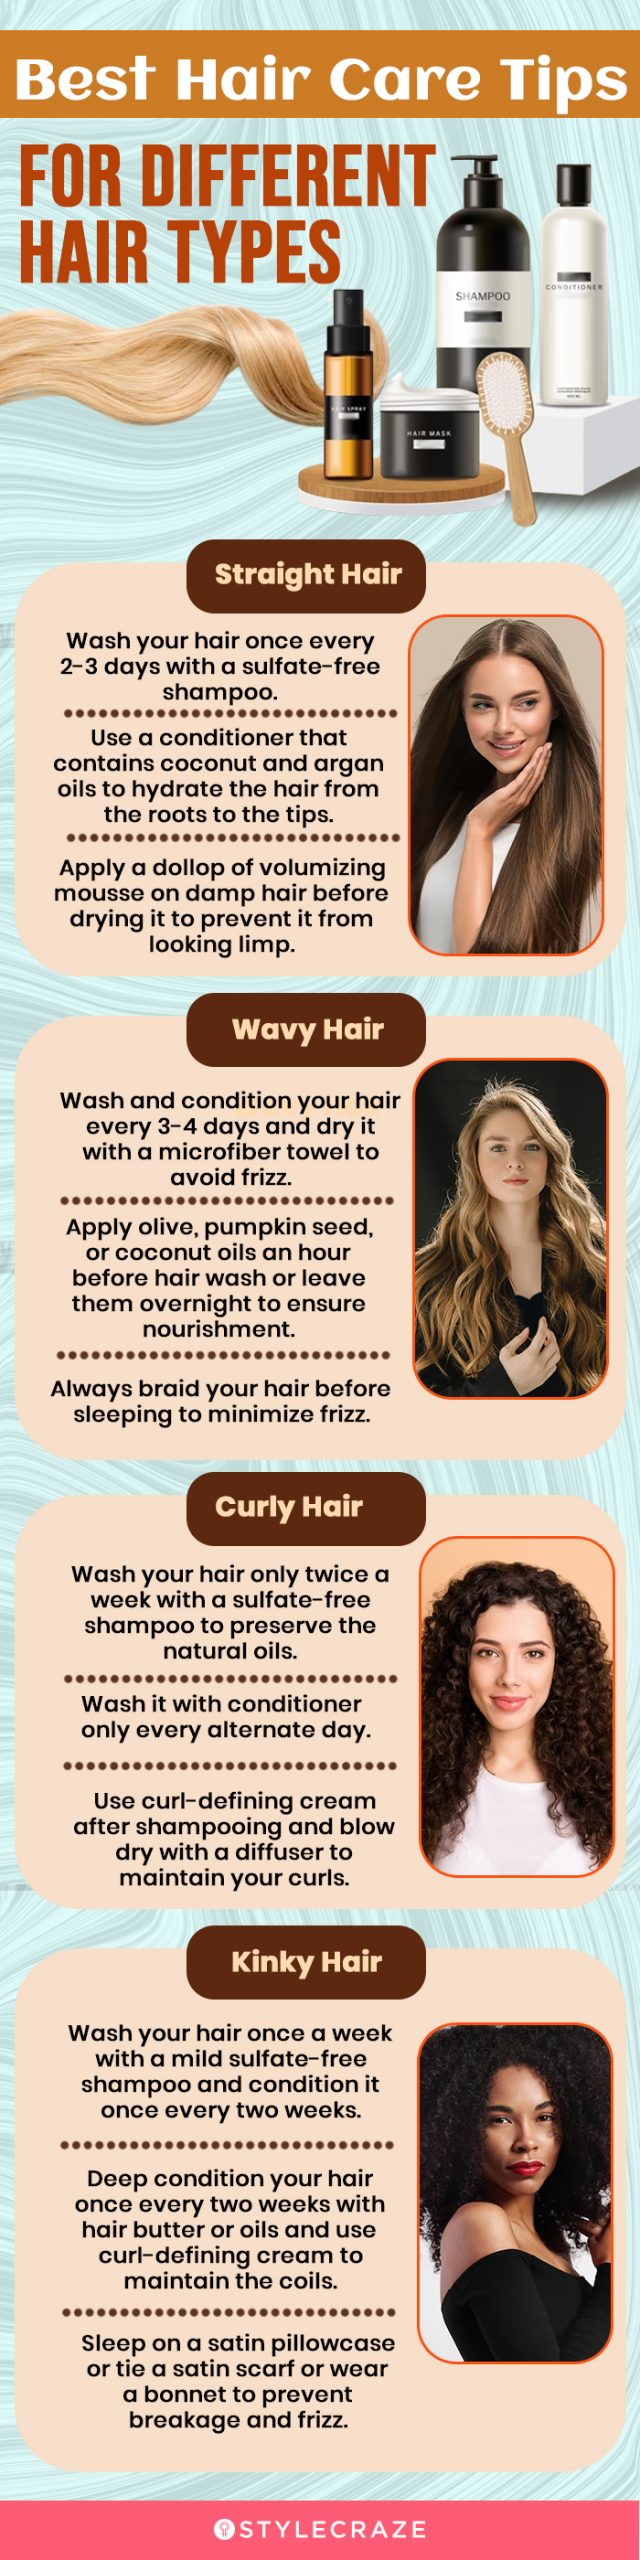 best hair care tips for different hair types (infographic)